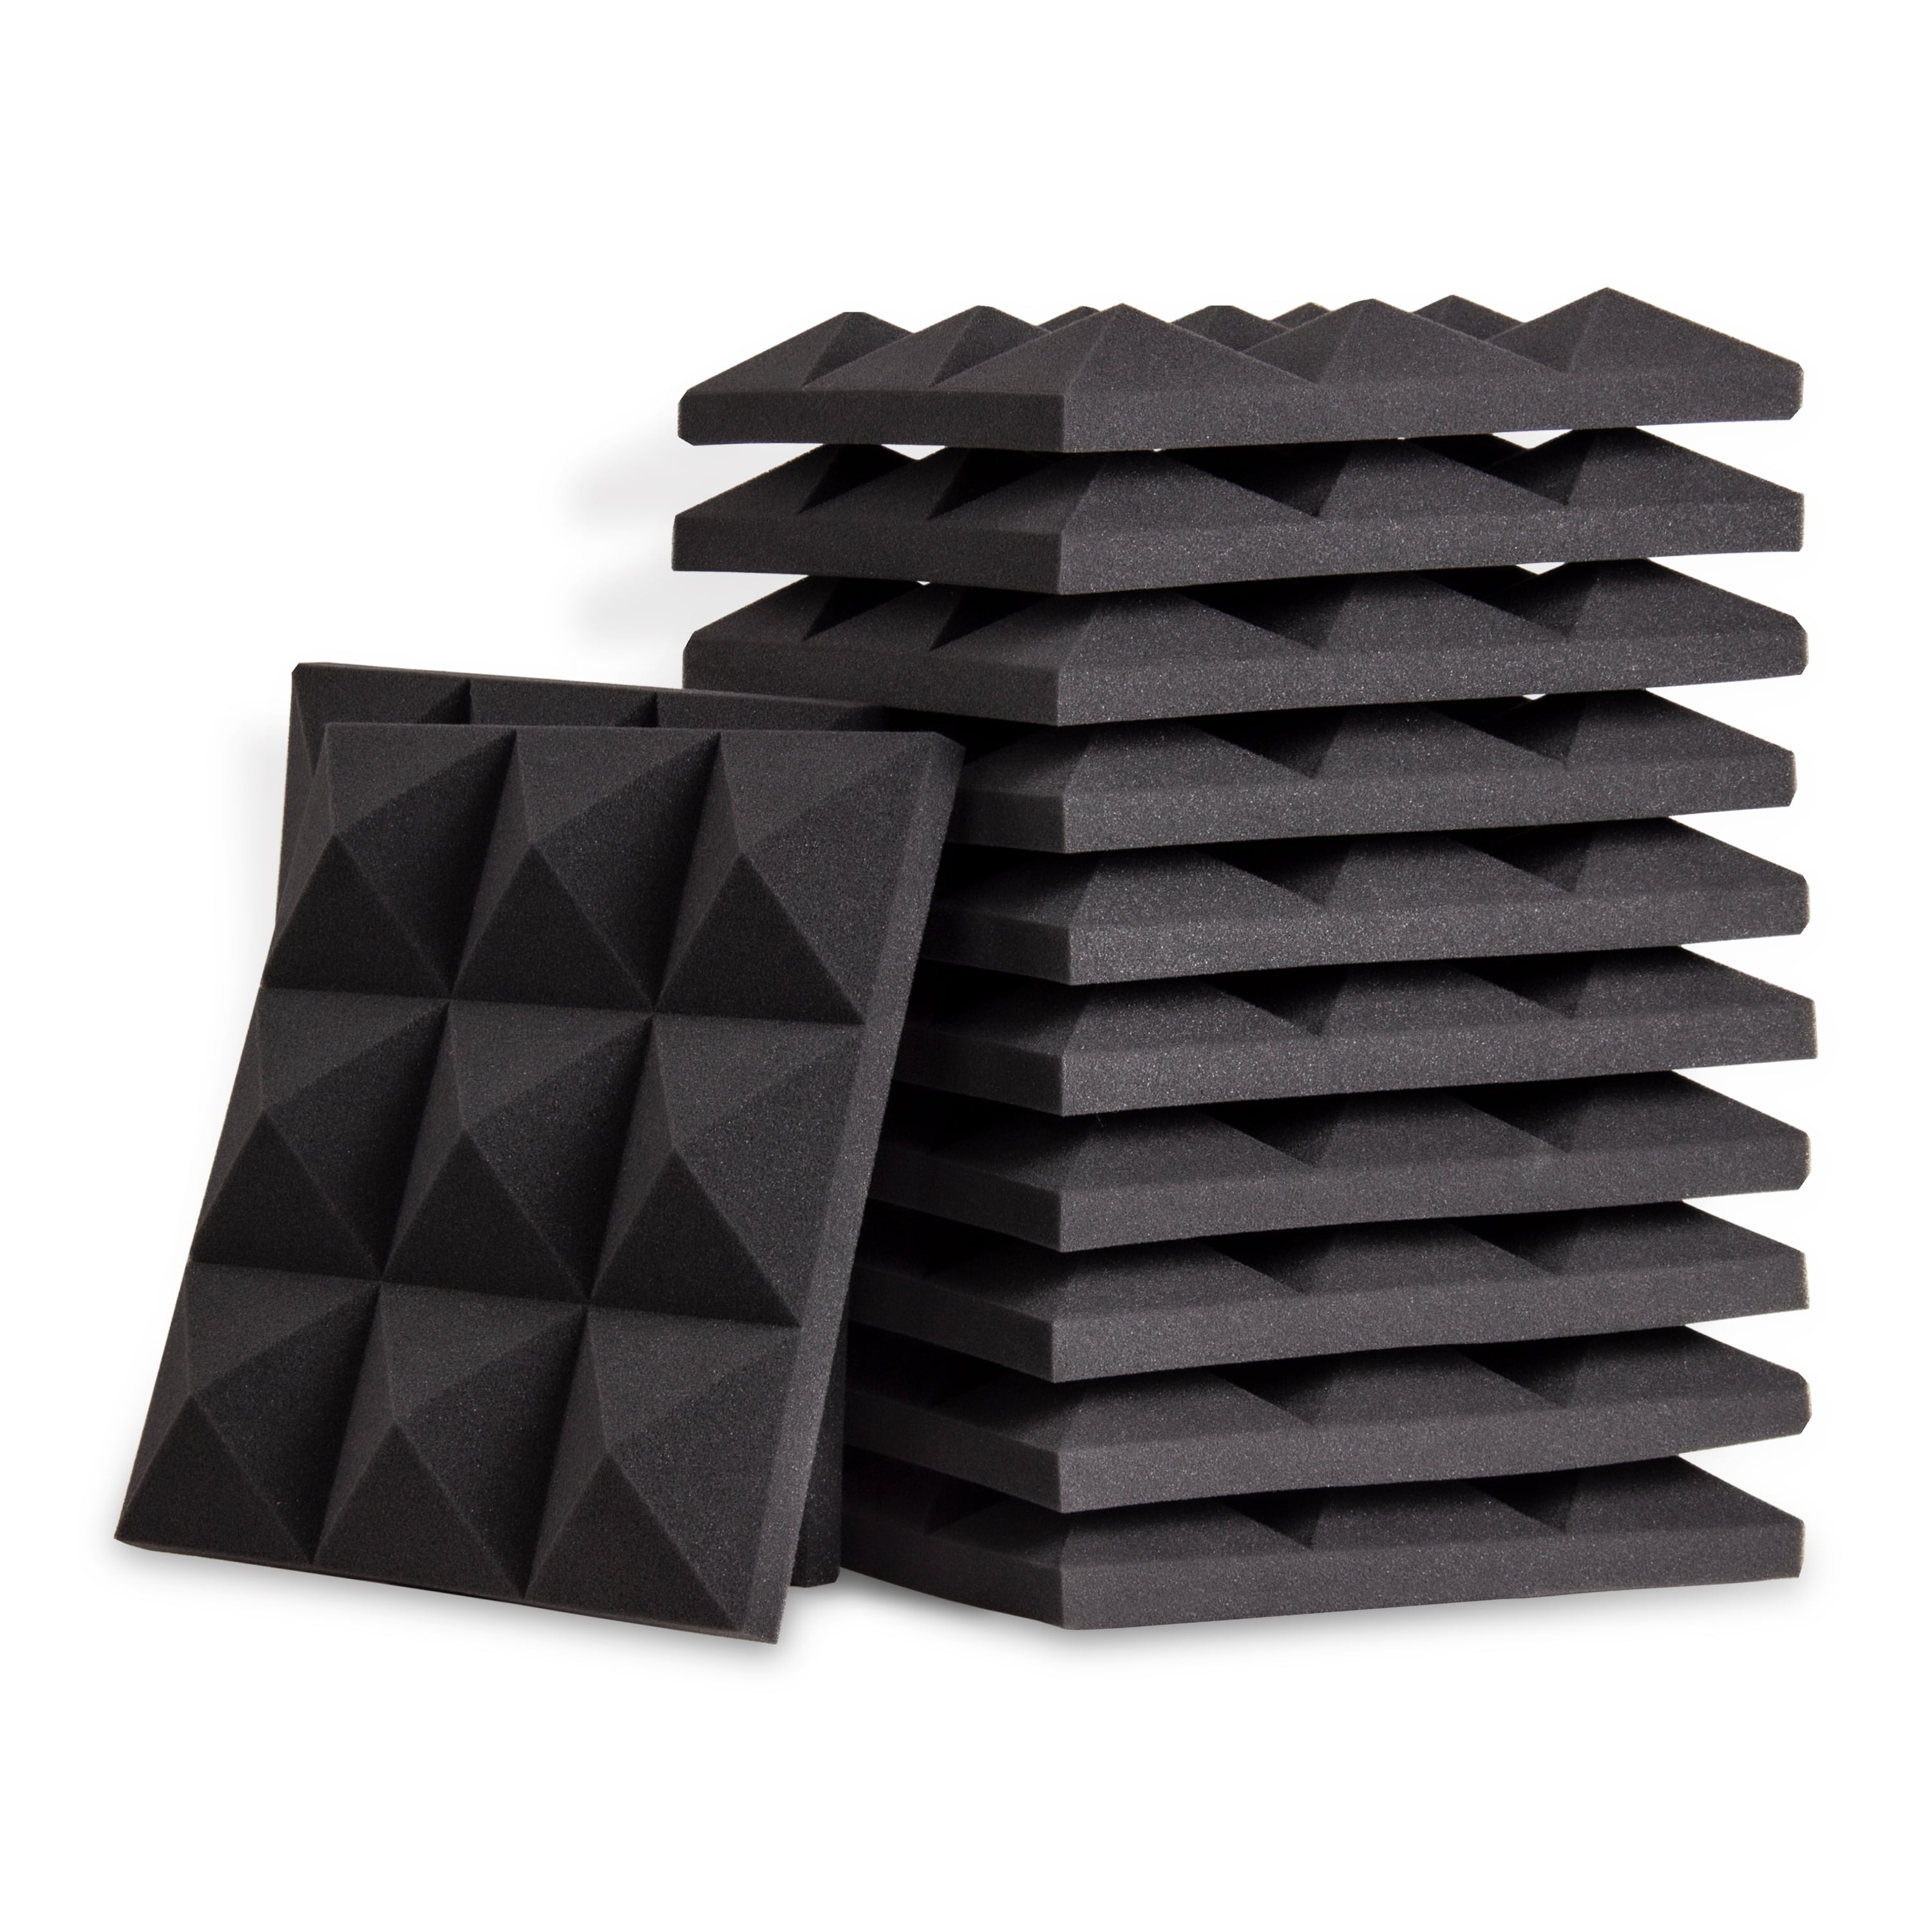 SoundAssured Egg Crate Acoustic Foam Panels - 12 Color options 1-1/2 Inches Thick - 72x48 Panels / Blue / 2 Pack